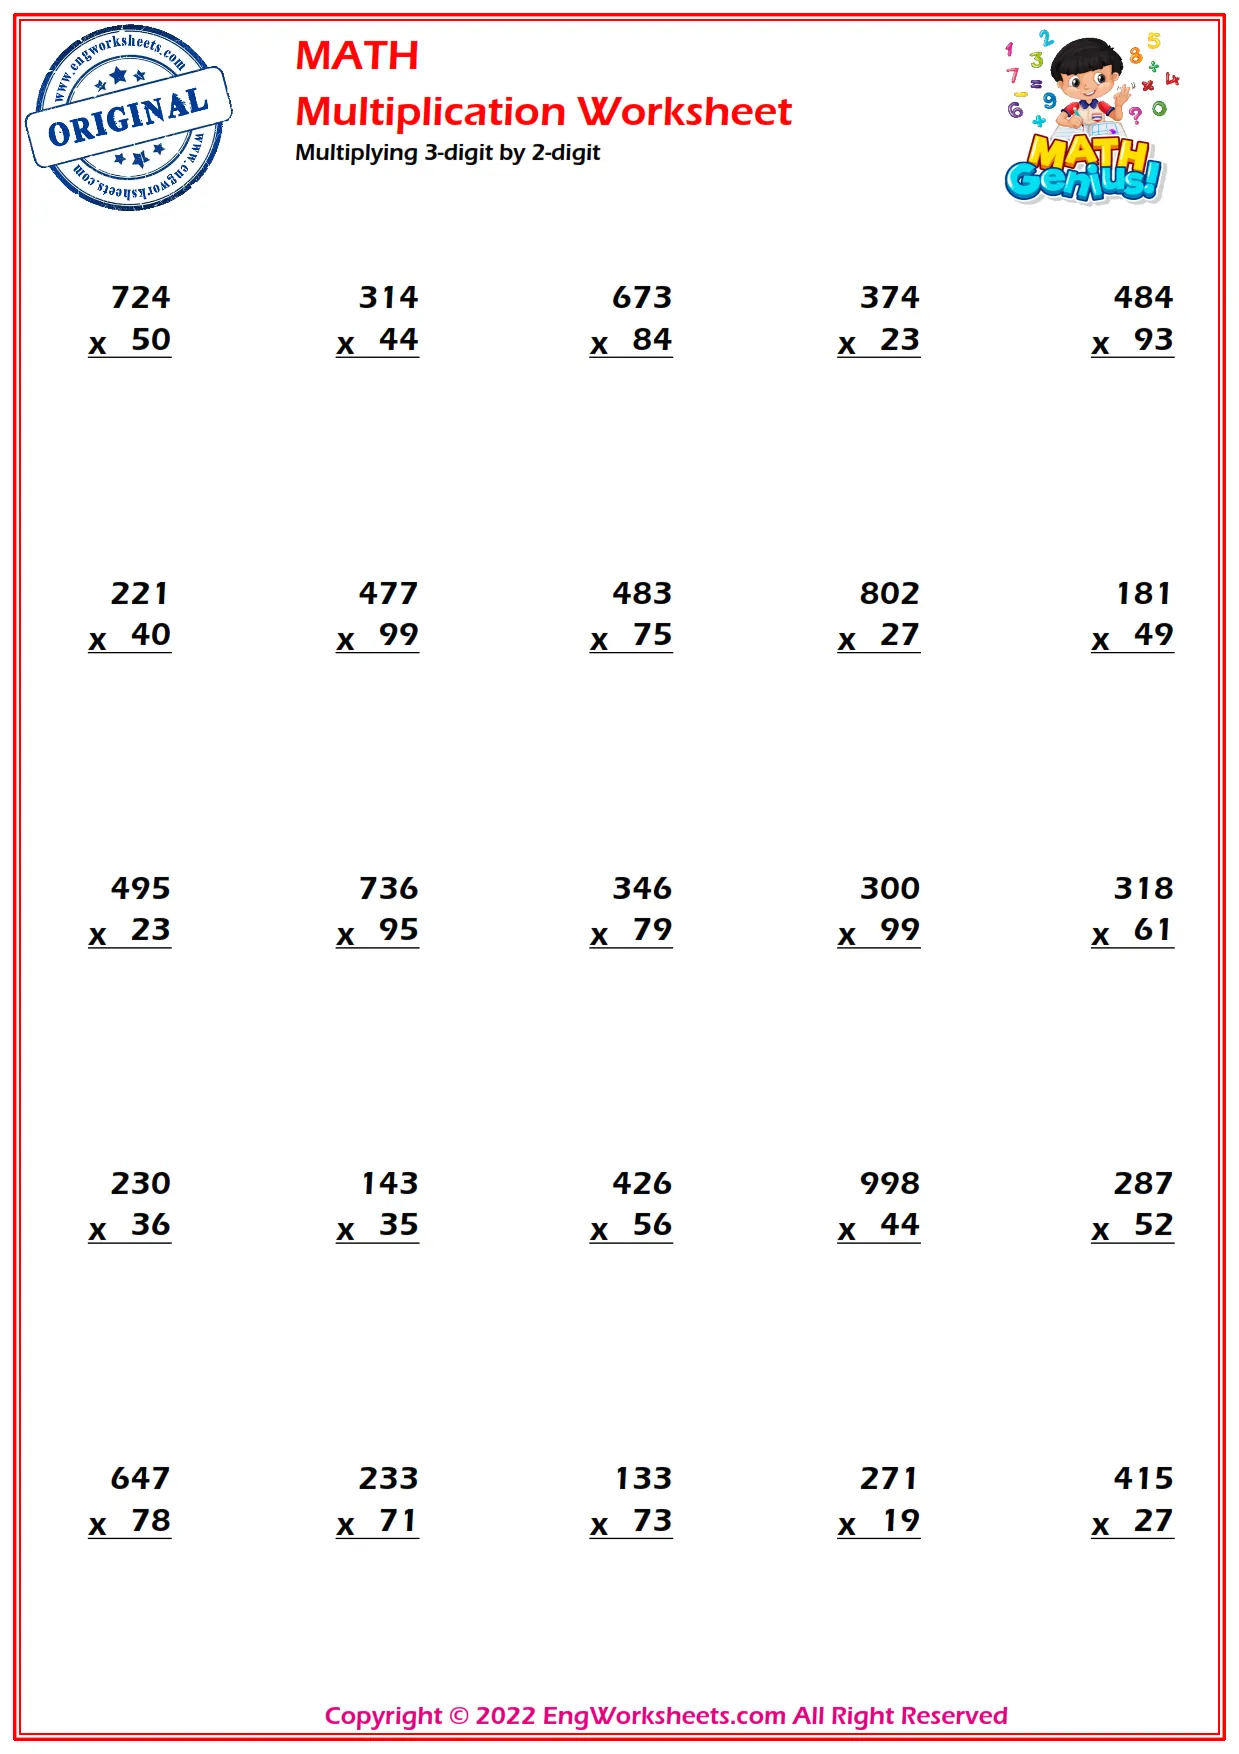 multiplying-3-digit-by-2-digit-worksheets-and-exercise-pdf-preview